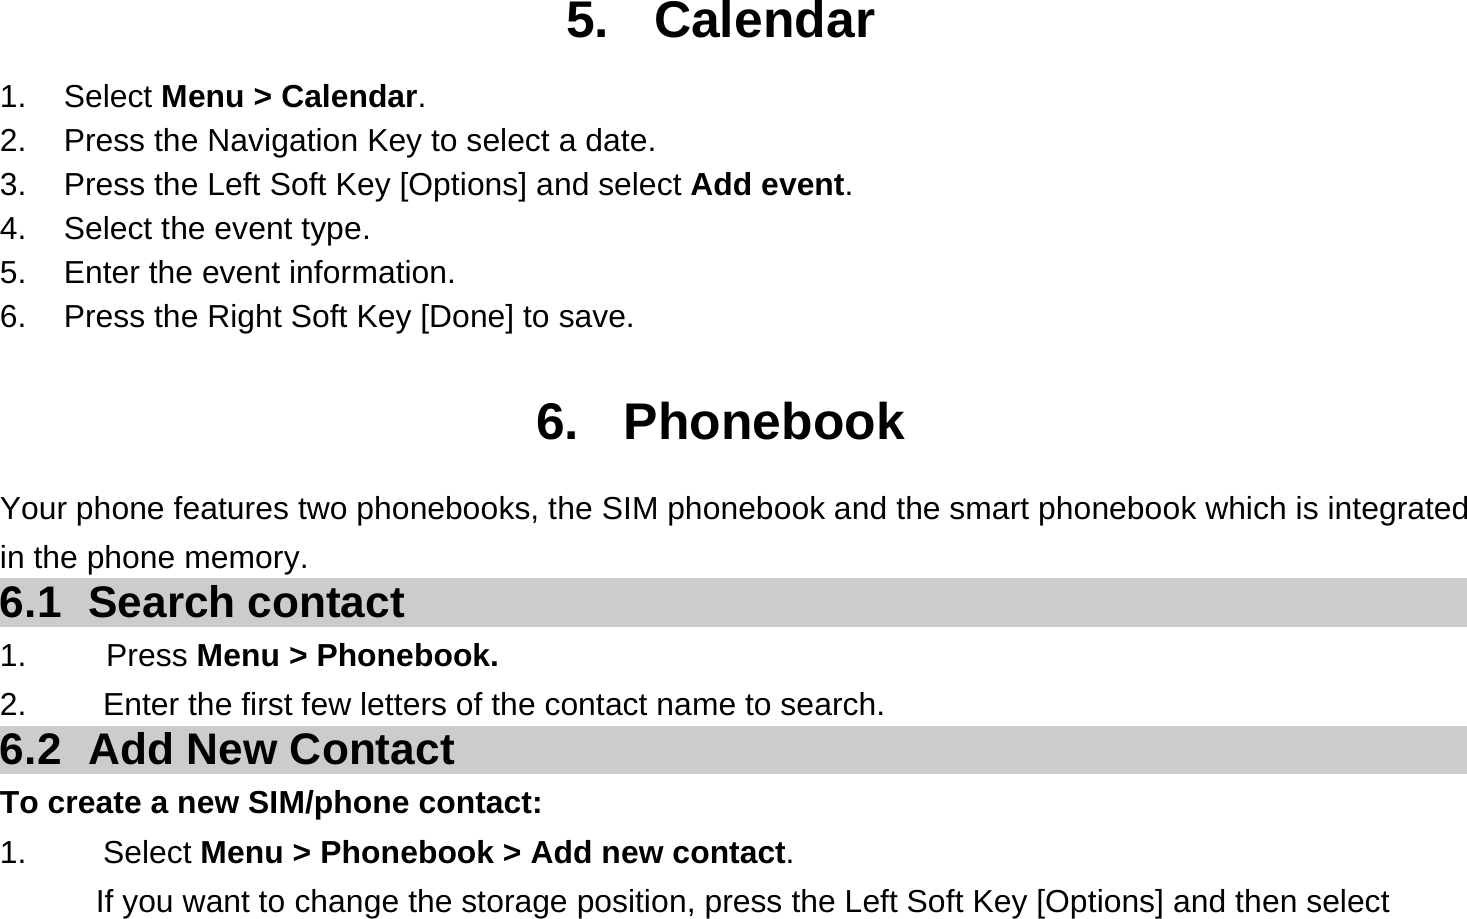 5. Calendar 1. Select Menu &gt; Calendar. 2.  Press the Navigation Key to select a date. 3.  Press the Left Soft Key [Options] and select Add event. 4.  Select the event type. 5.  Enter the event information. 6.  Press the Right Soft Key [Done] to save.  6. Phonebook Your phone features two phonebooks, the SIM phonebook and the smart phonebook which is integrated in the phone memory. 6.1 Search contact 1.     Press Menu &gt; Phonebook. 2.  Enter the first few letters of the contact name to search. 6.2  Add New Contact To create a new SIM/phone contact: 1.   Select Menu &gt; Phonebook &gt; Add new contact. If you want to change the storage position, press the Left Soft Key [Options] and then select 